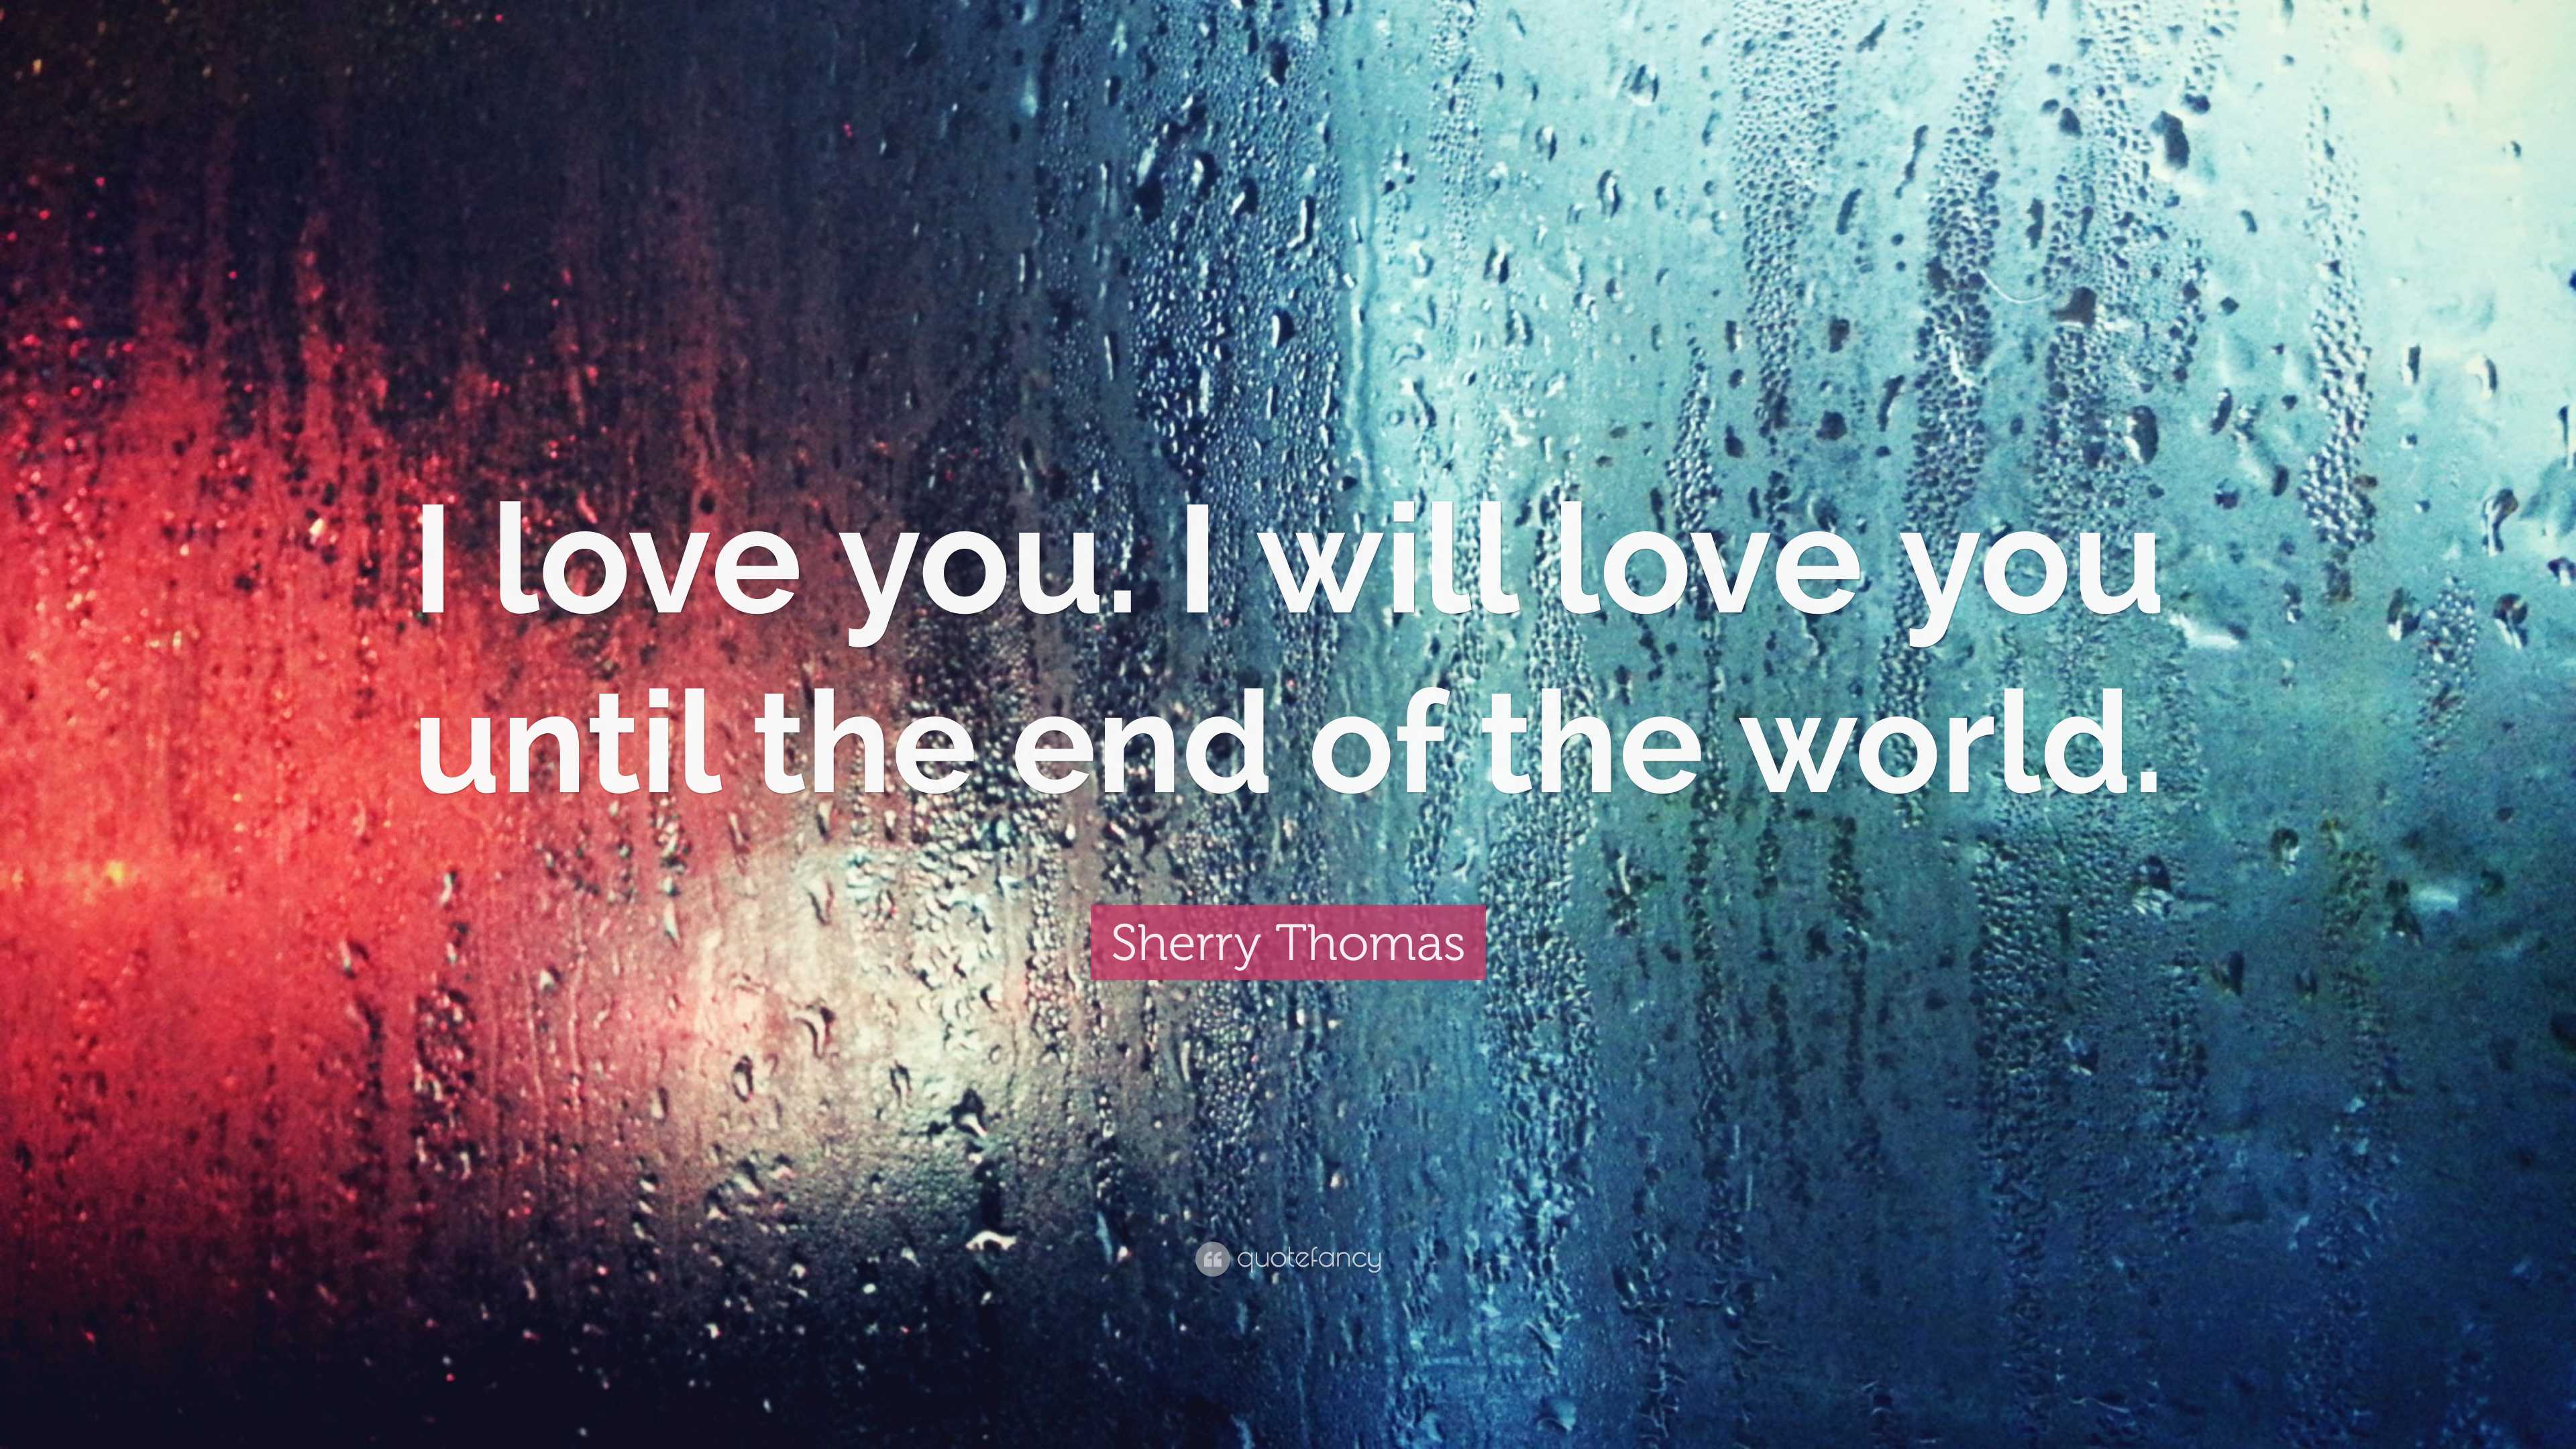 I Love You Until The End Sherry Thomas Quote: “I love you. I will love you until the end of the  world.”